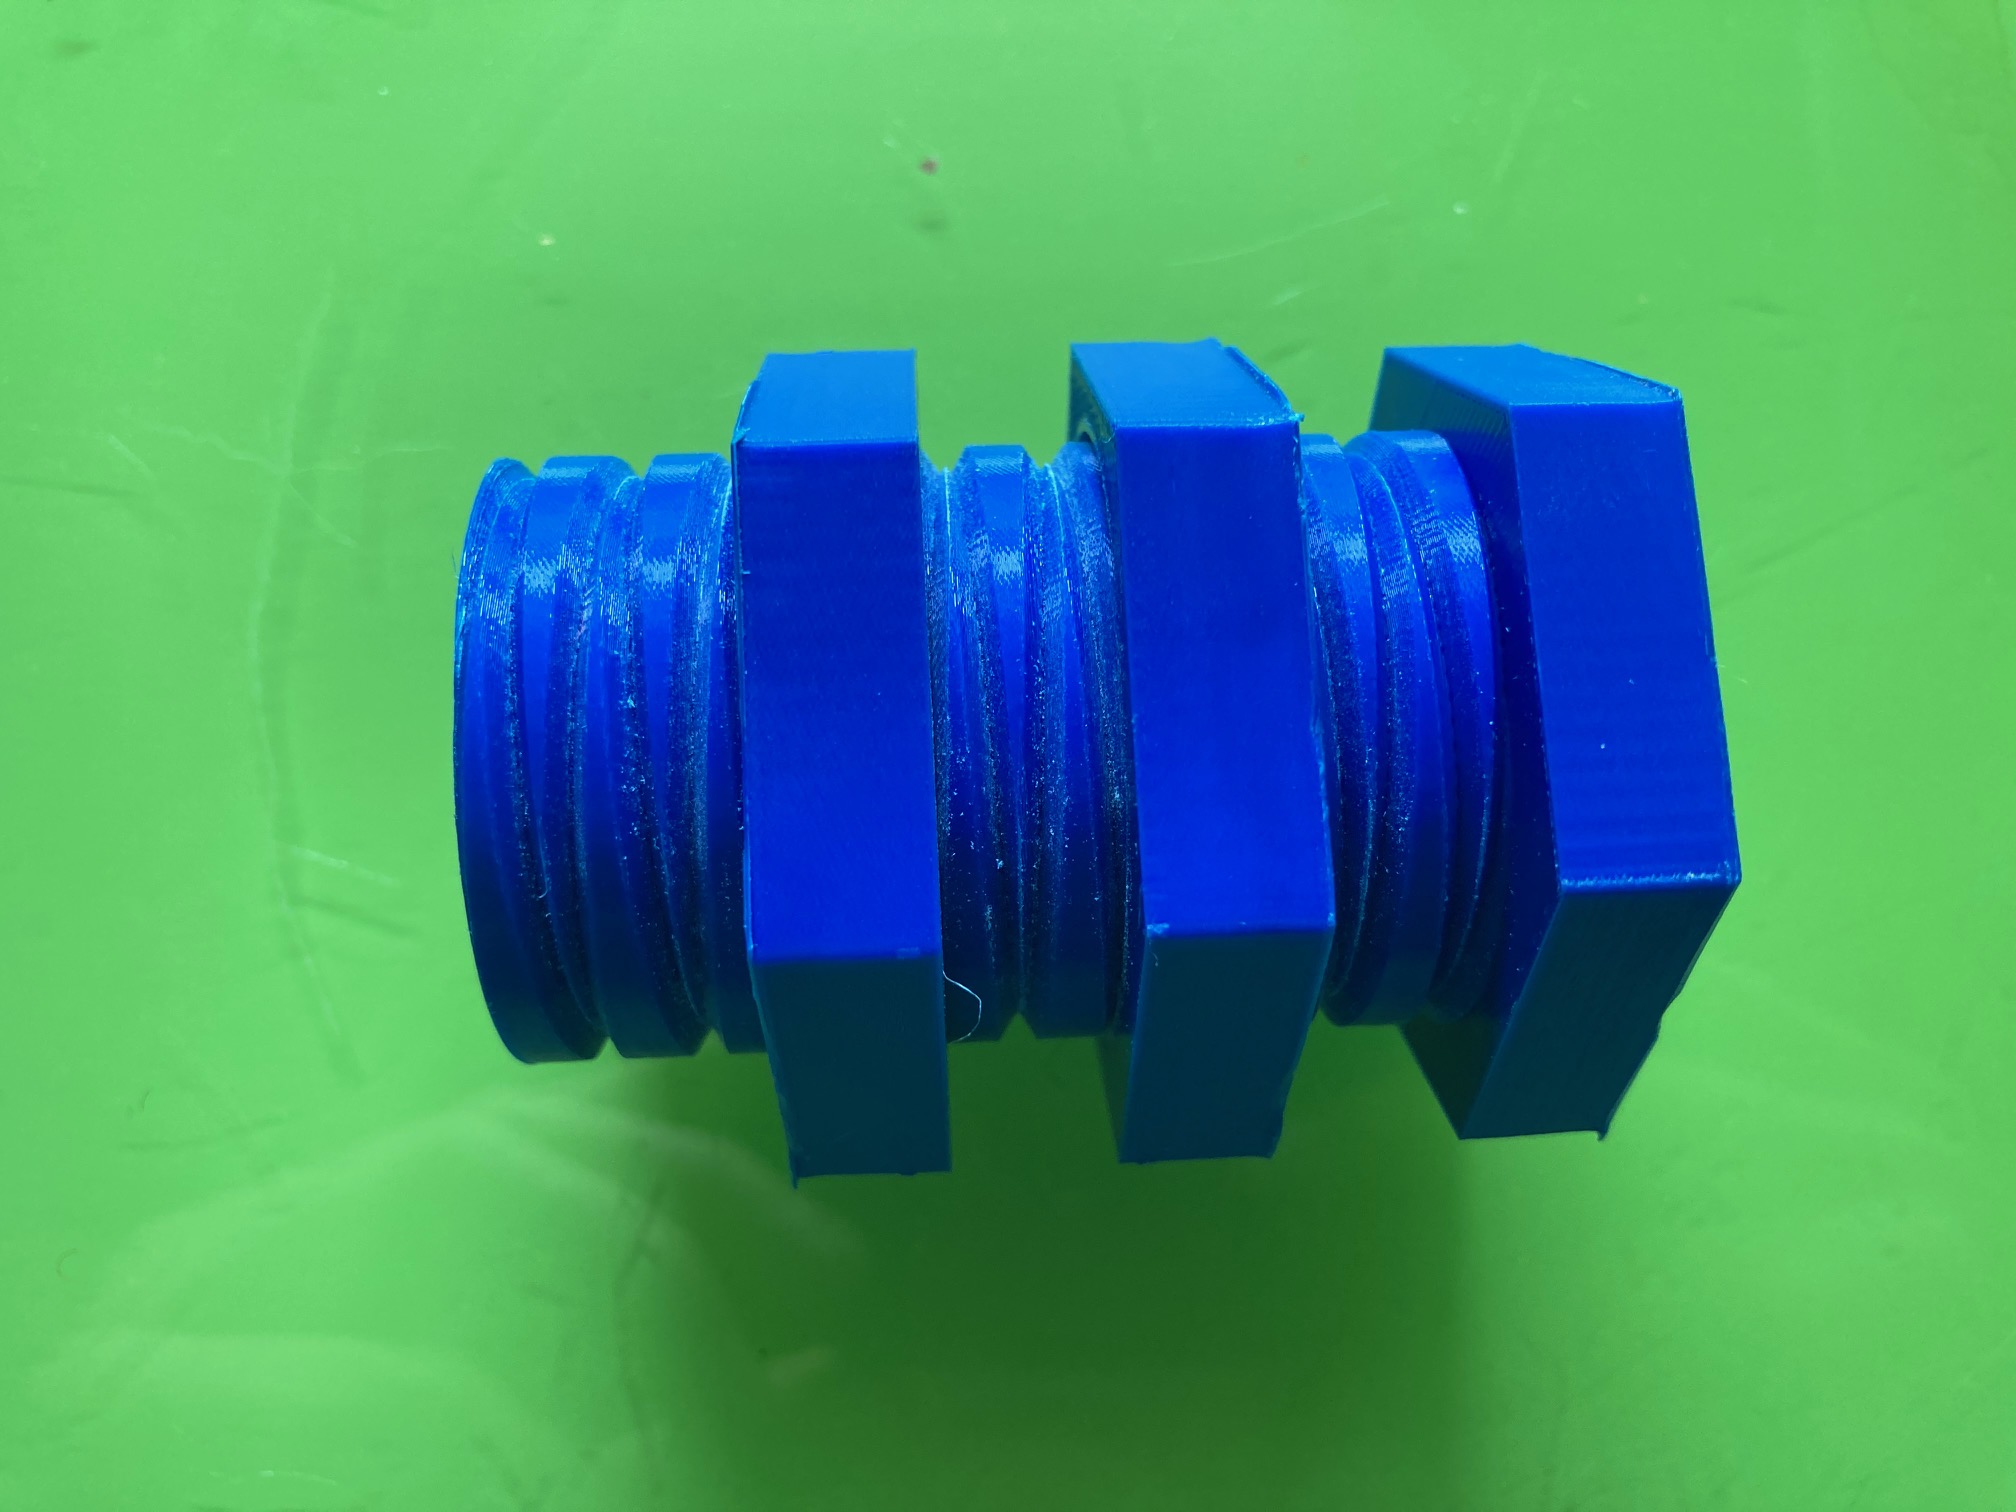 Dual threaded bolt and nut toy